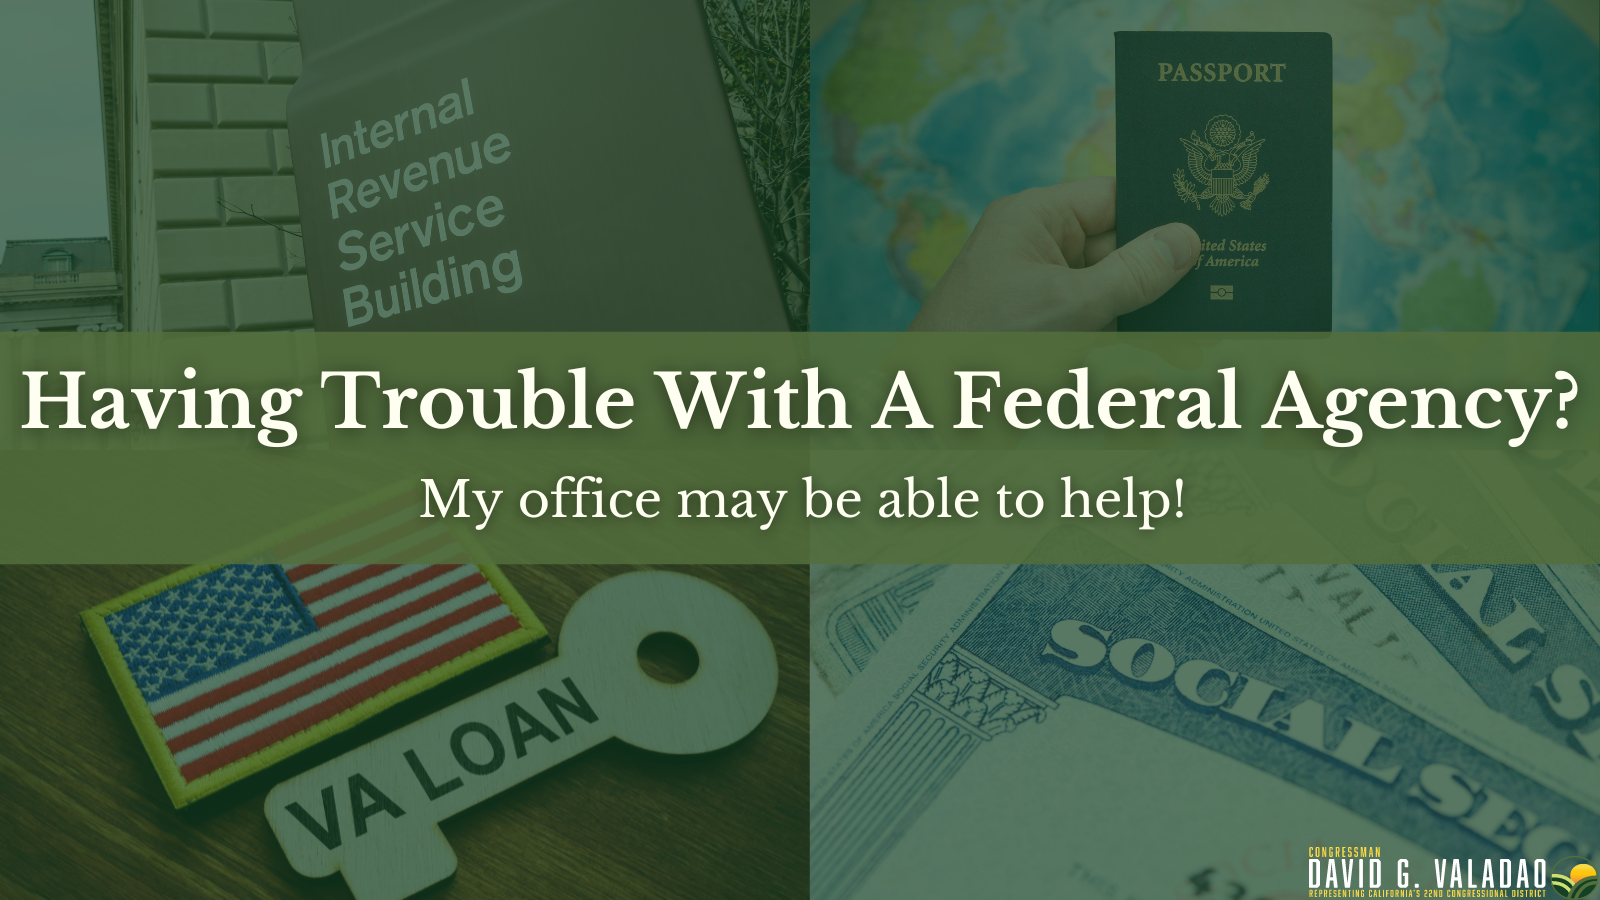 Having trouble with a federal agency?